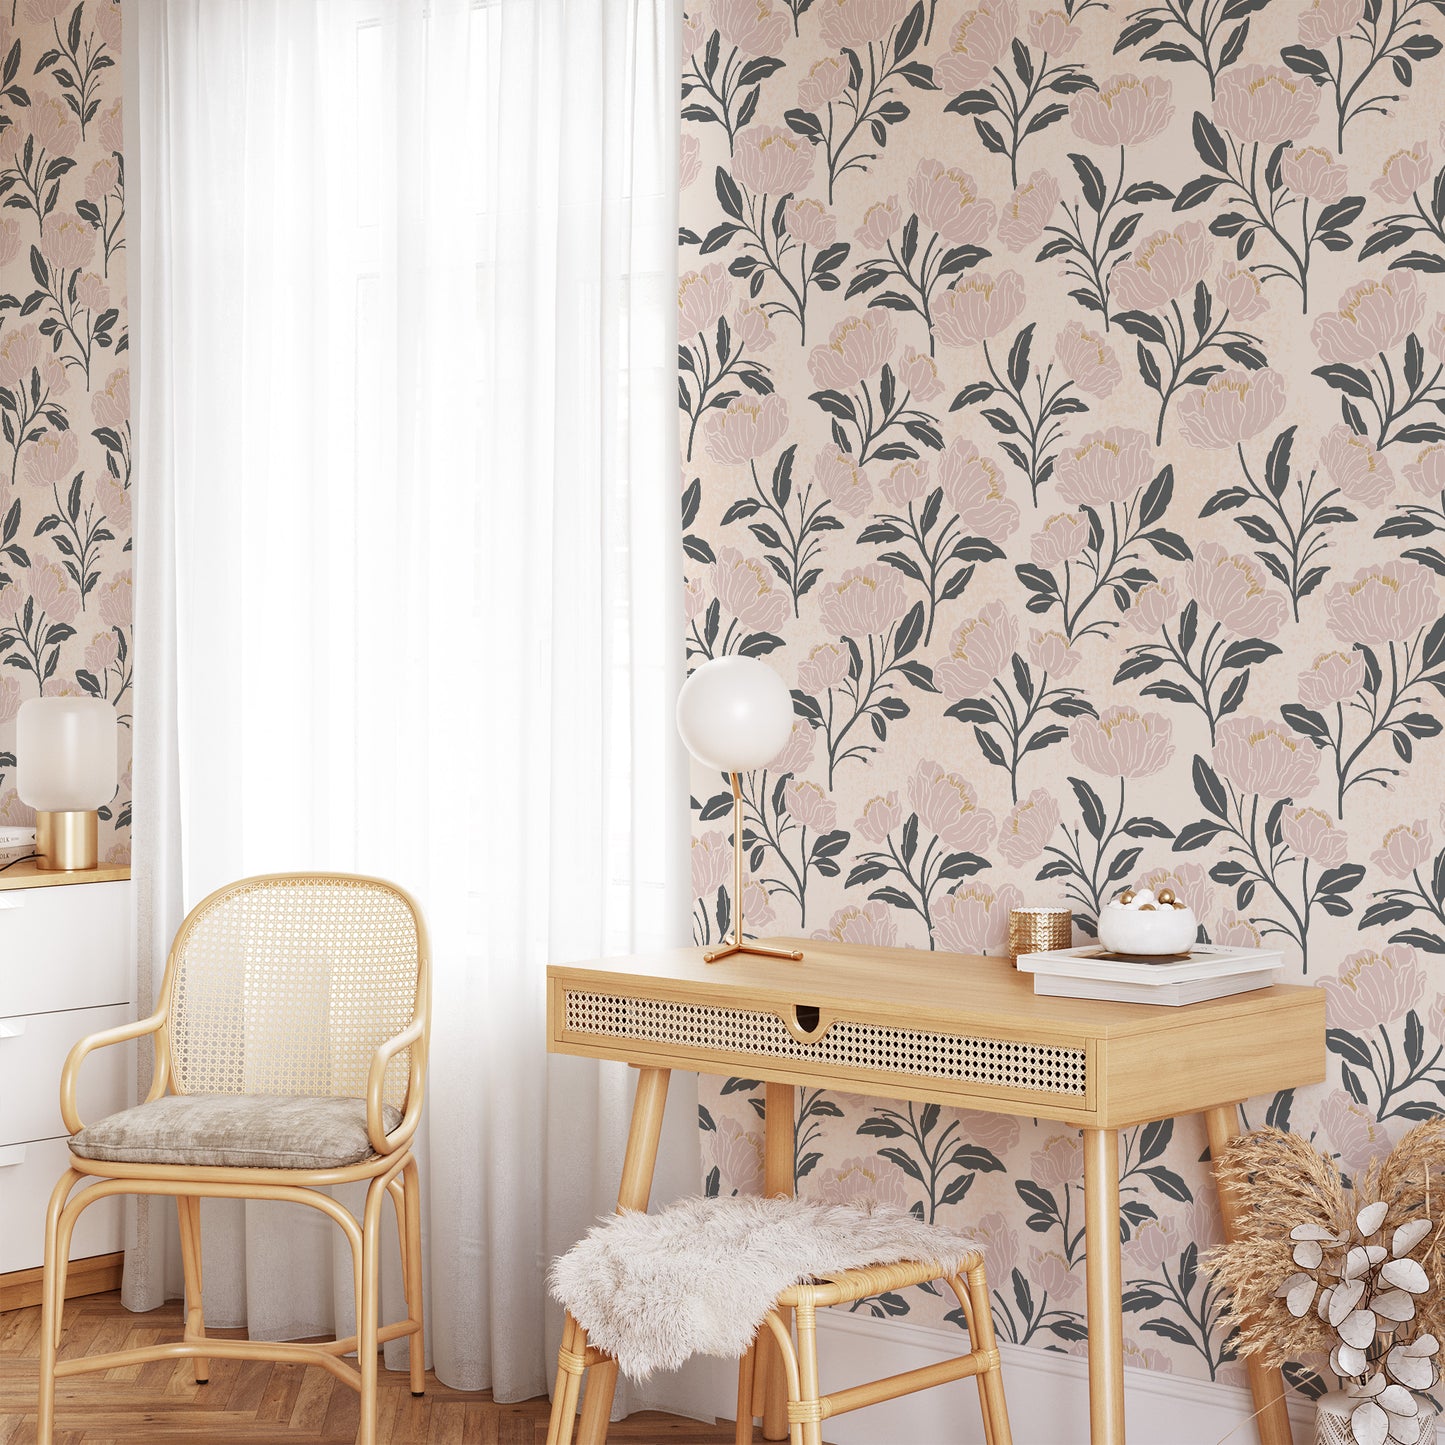 Our peel and stick removable Peonies Dream Wallpaper in Blush in a teen bedroom.